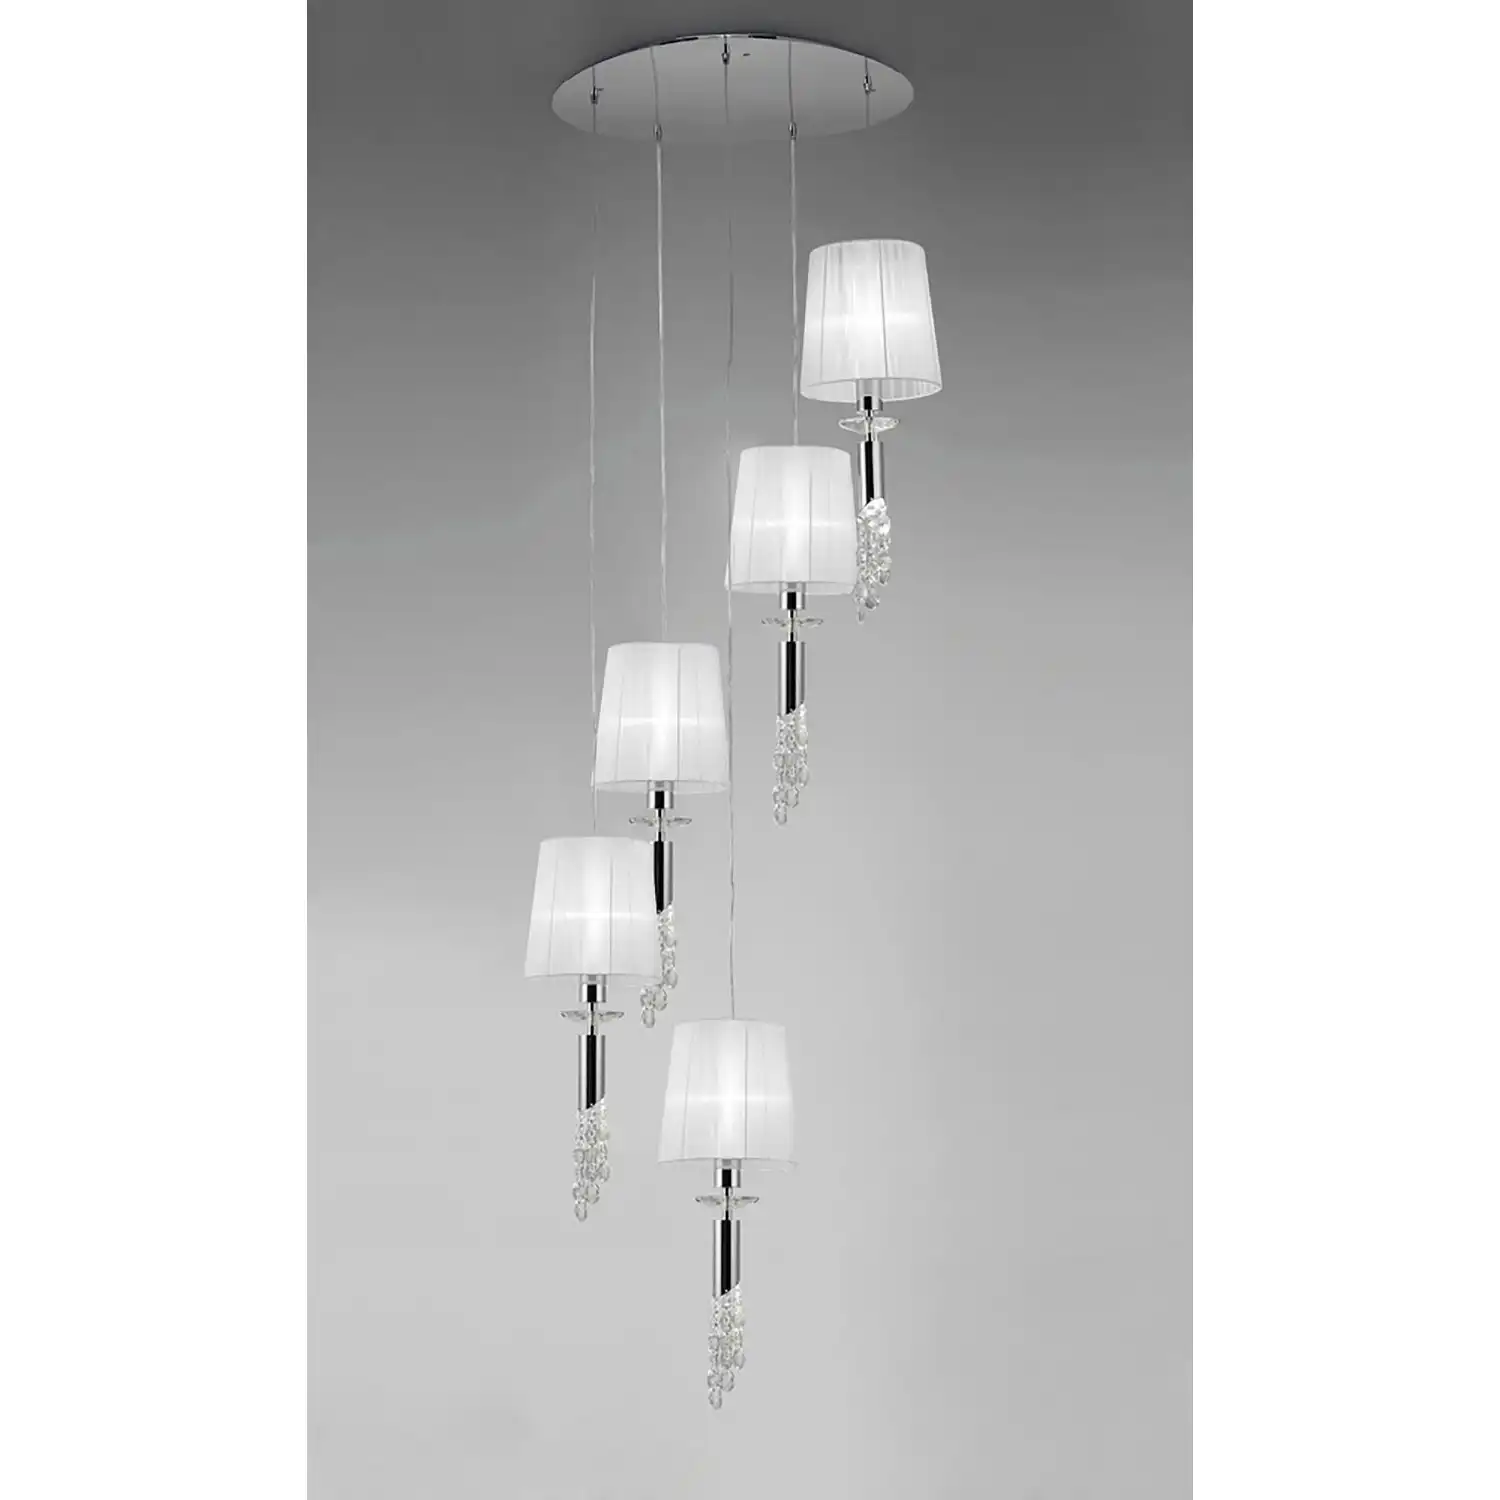 Tiffany Pendant 5+5 Light E27+G9 Spiral, Polished Chrome With White Shades And Clear Crystal